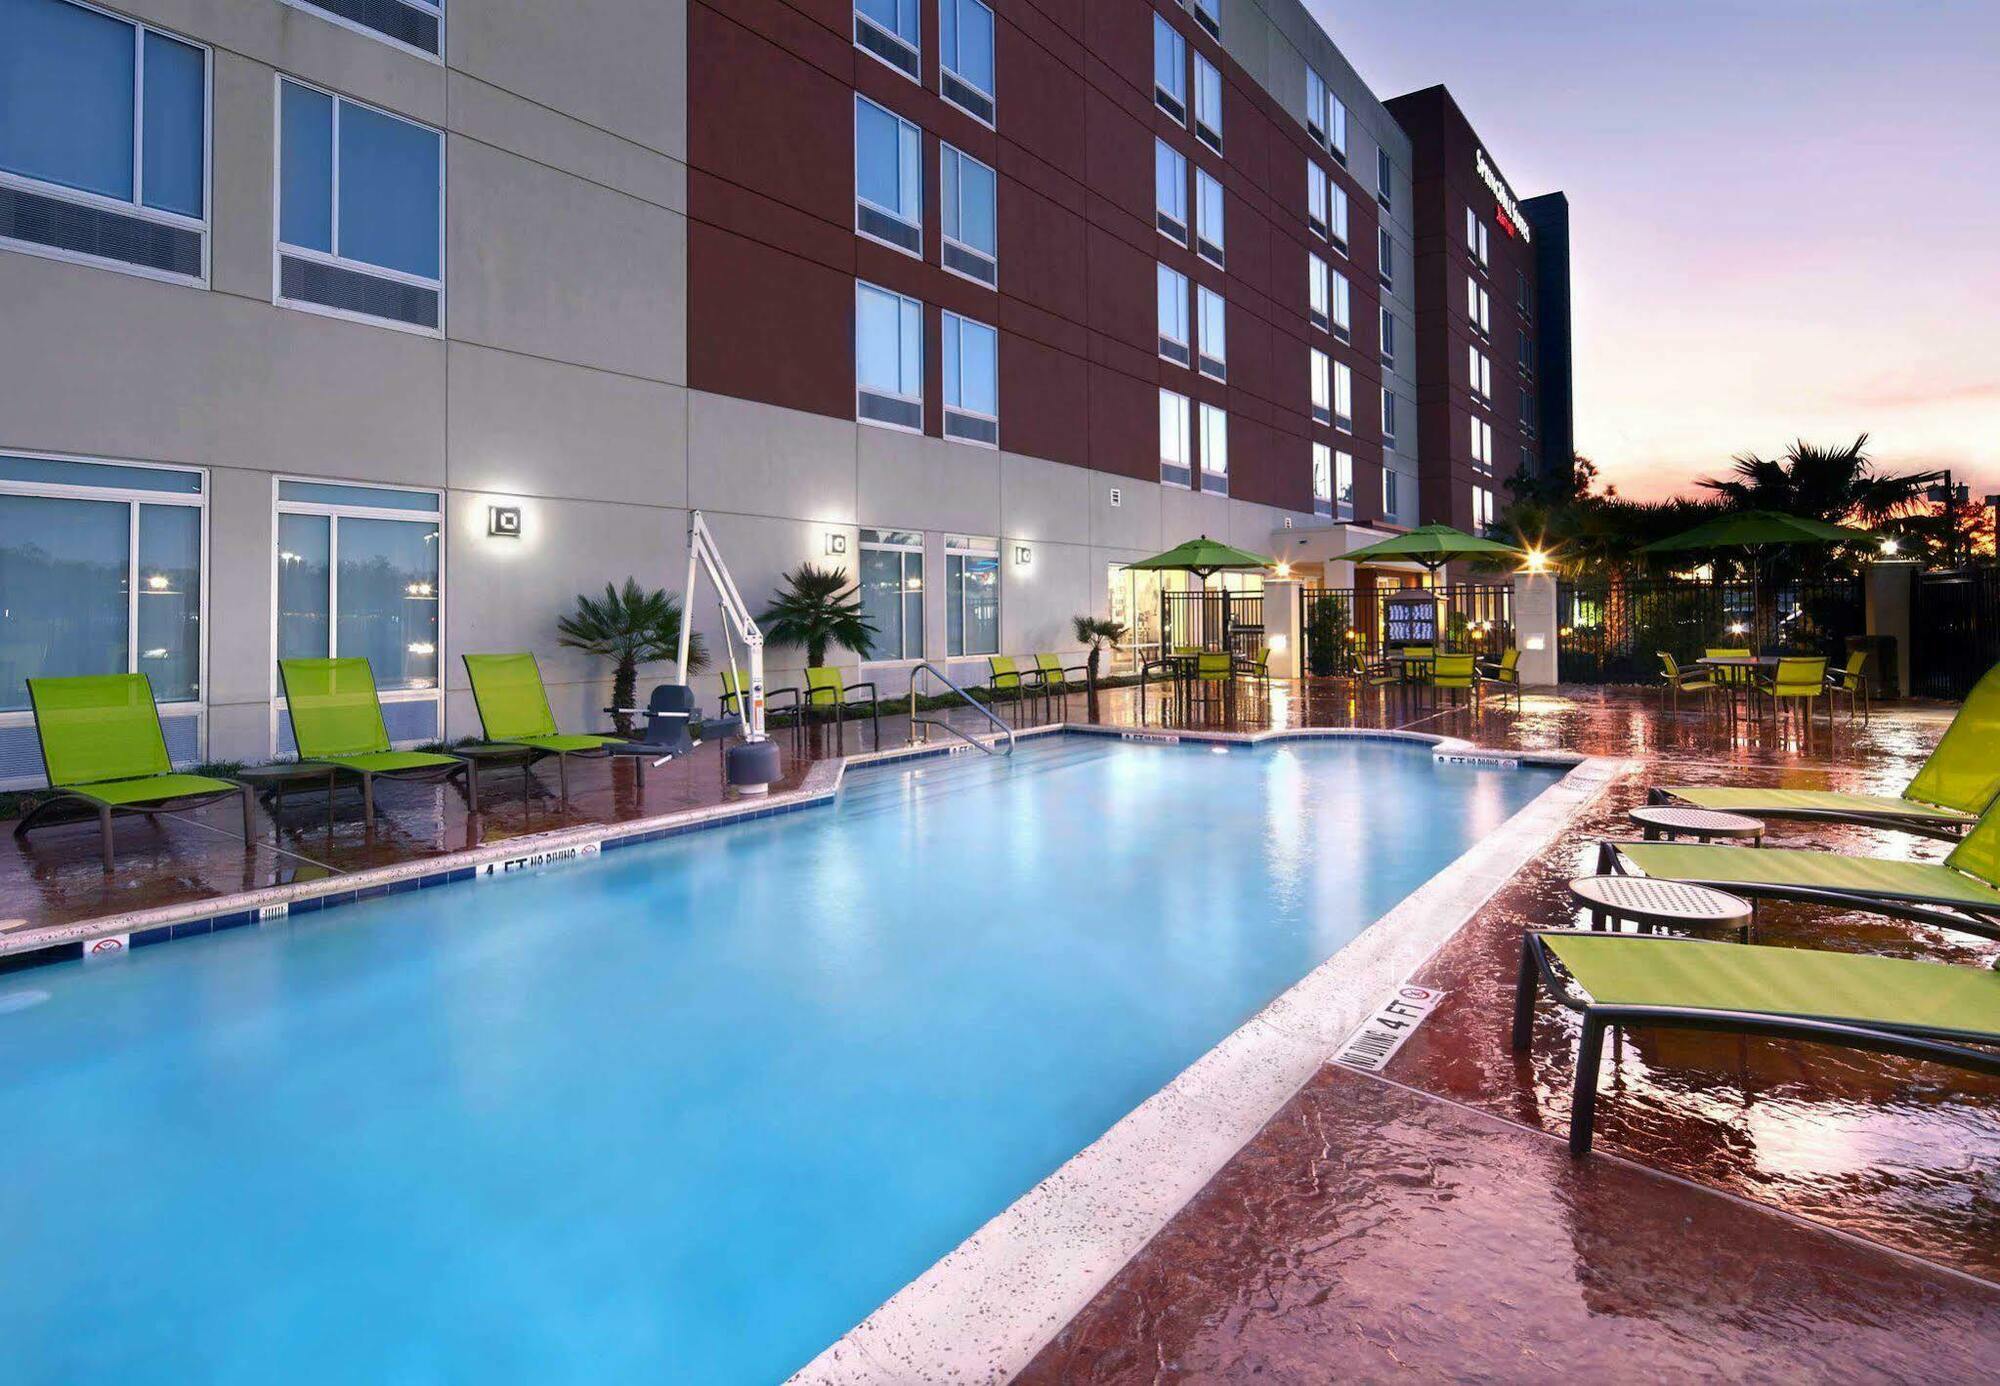 Springhill Suites Houston Intercontinental Airport Exterior photo